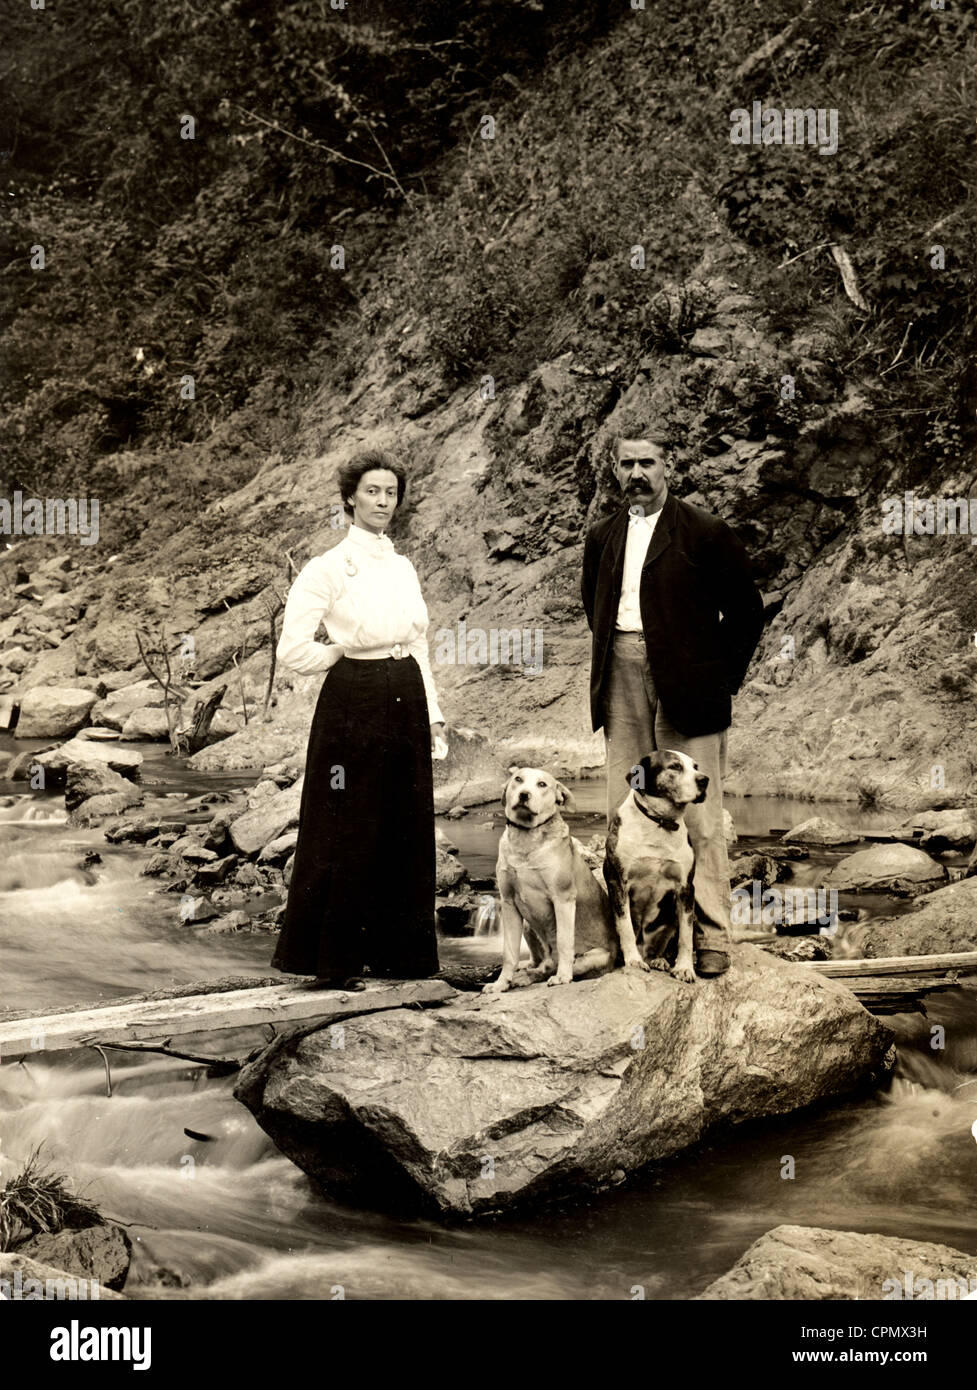 Well Dressed Couple in Wilderness with Two Large Dogs Stock Photo